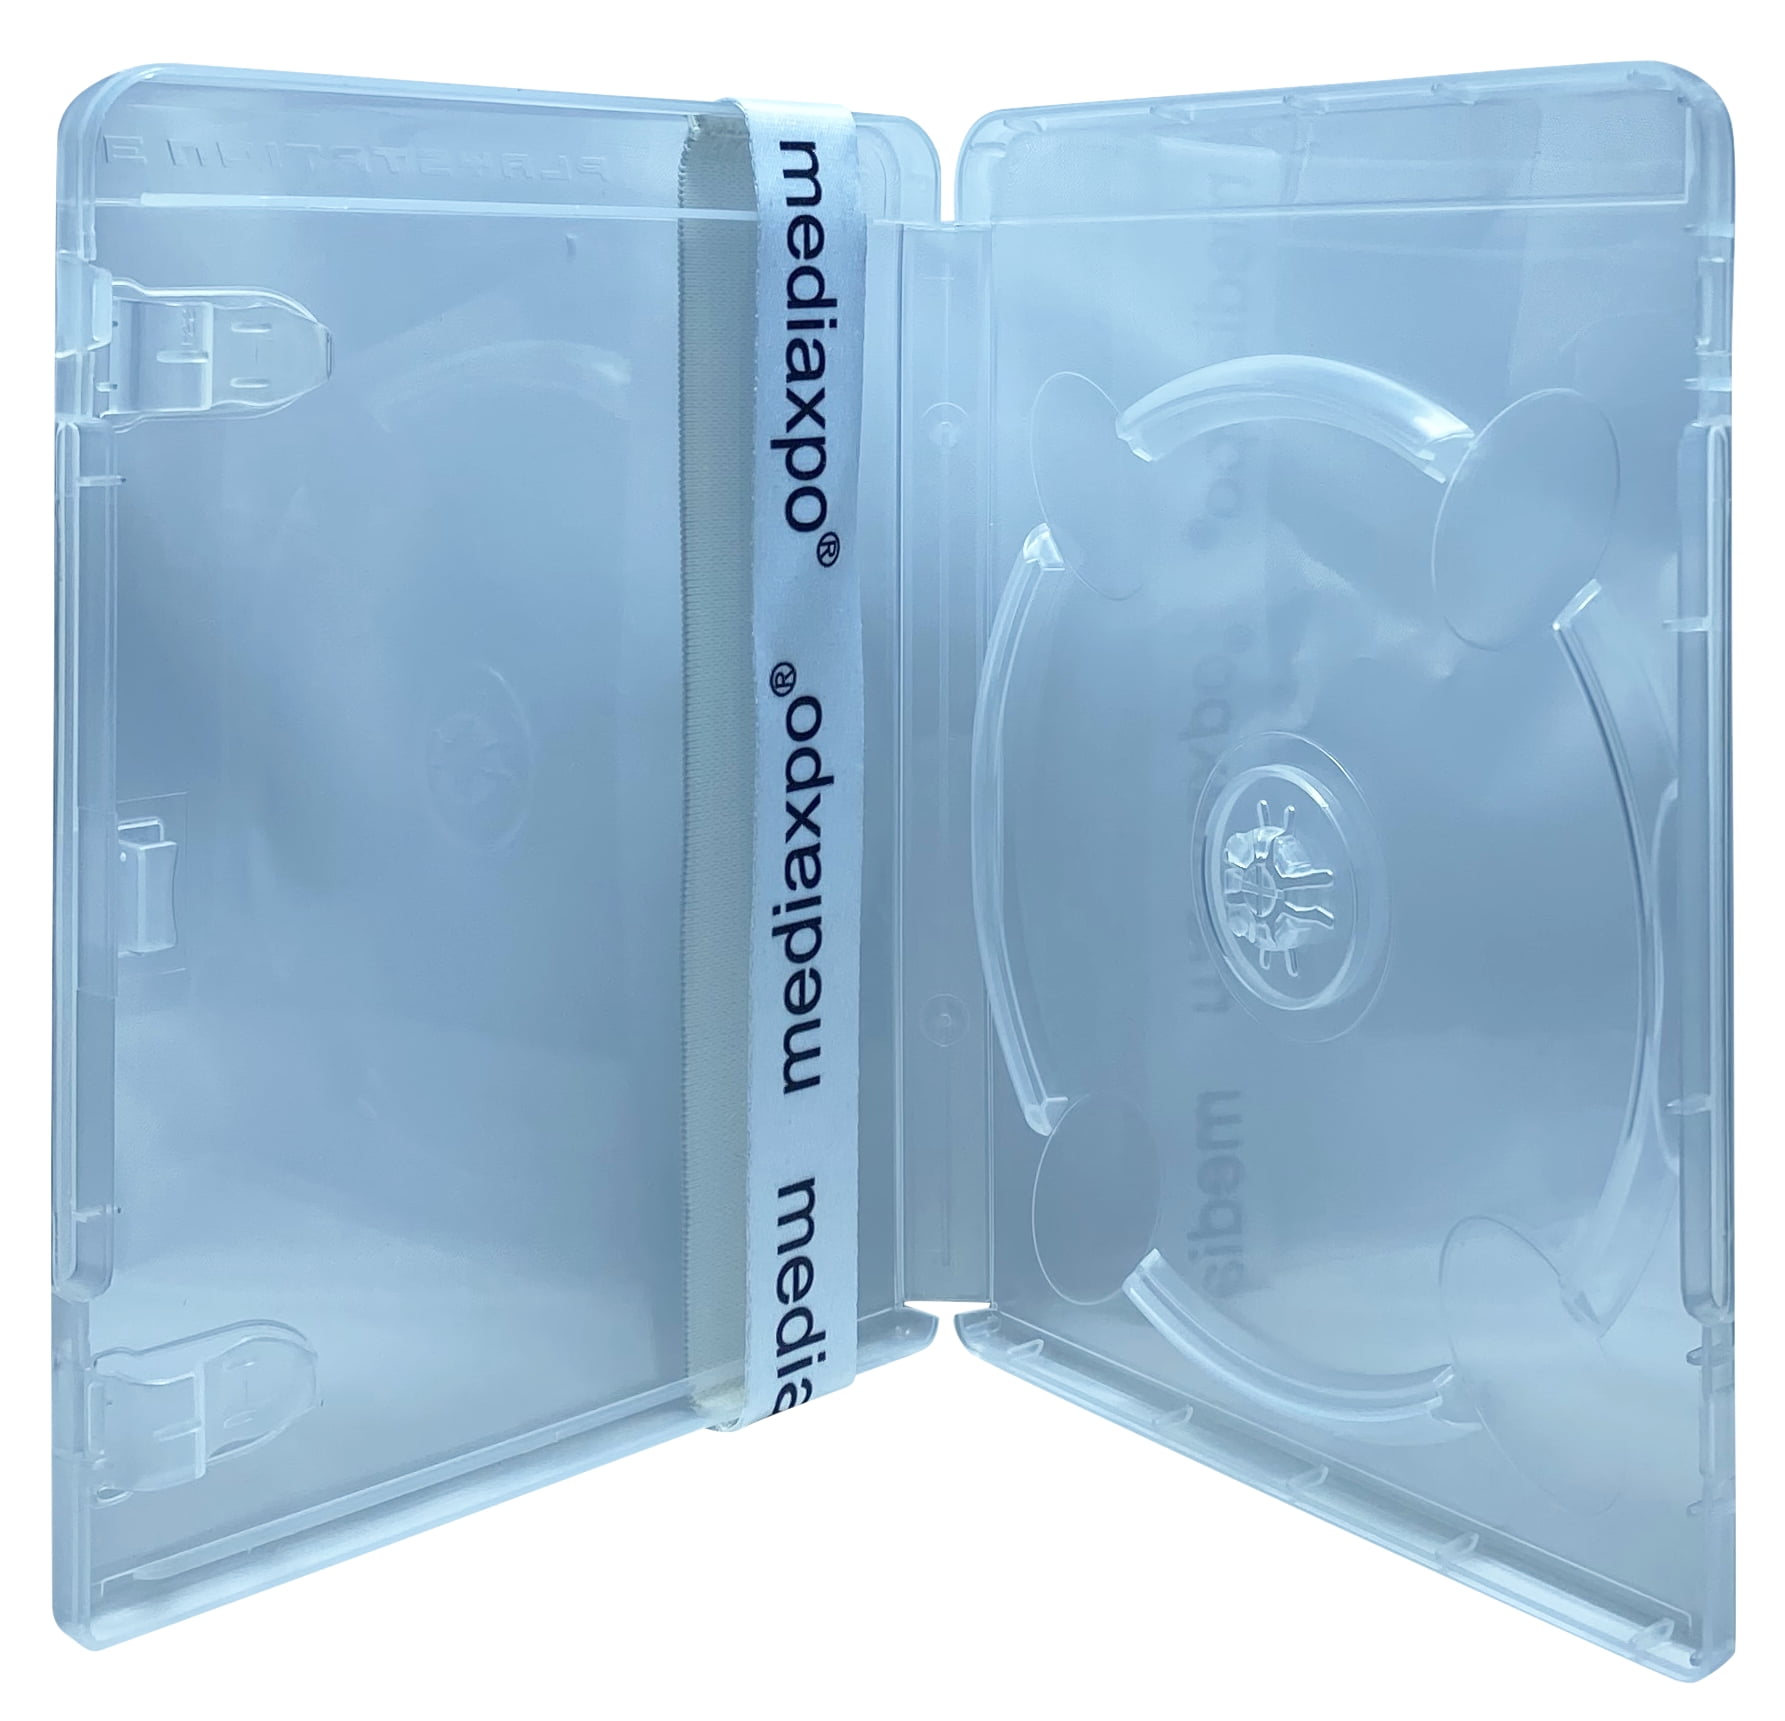 PlayStation 3 PS3 Game Case High Quality New Replacement Bluray Cover Amaray 